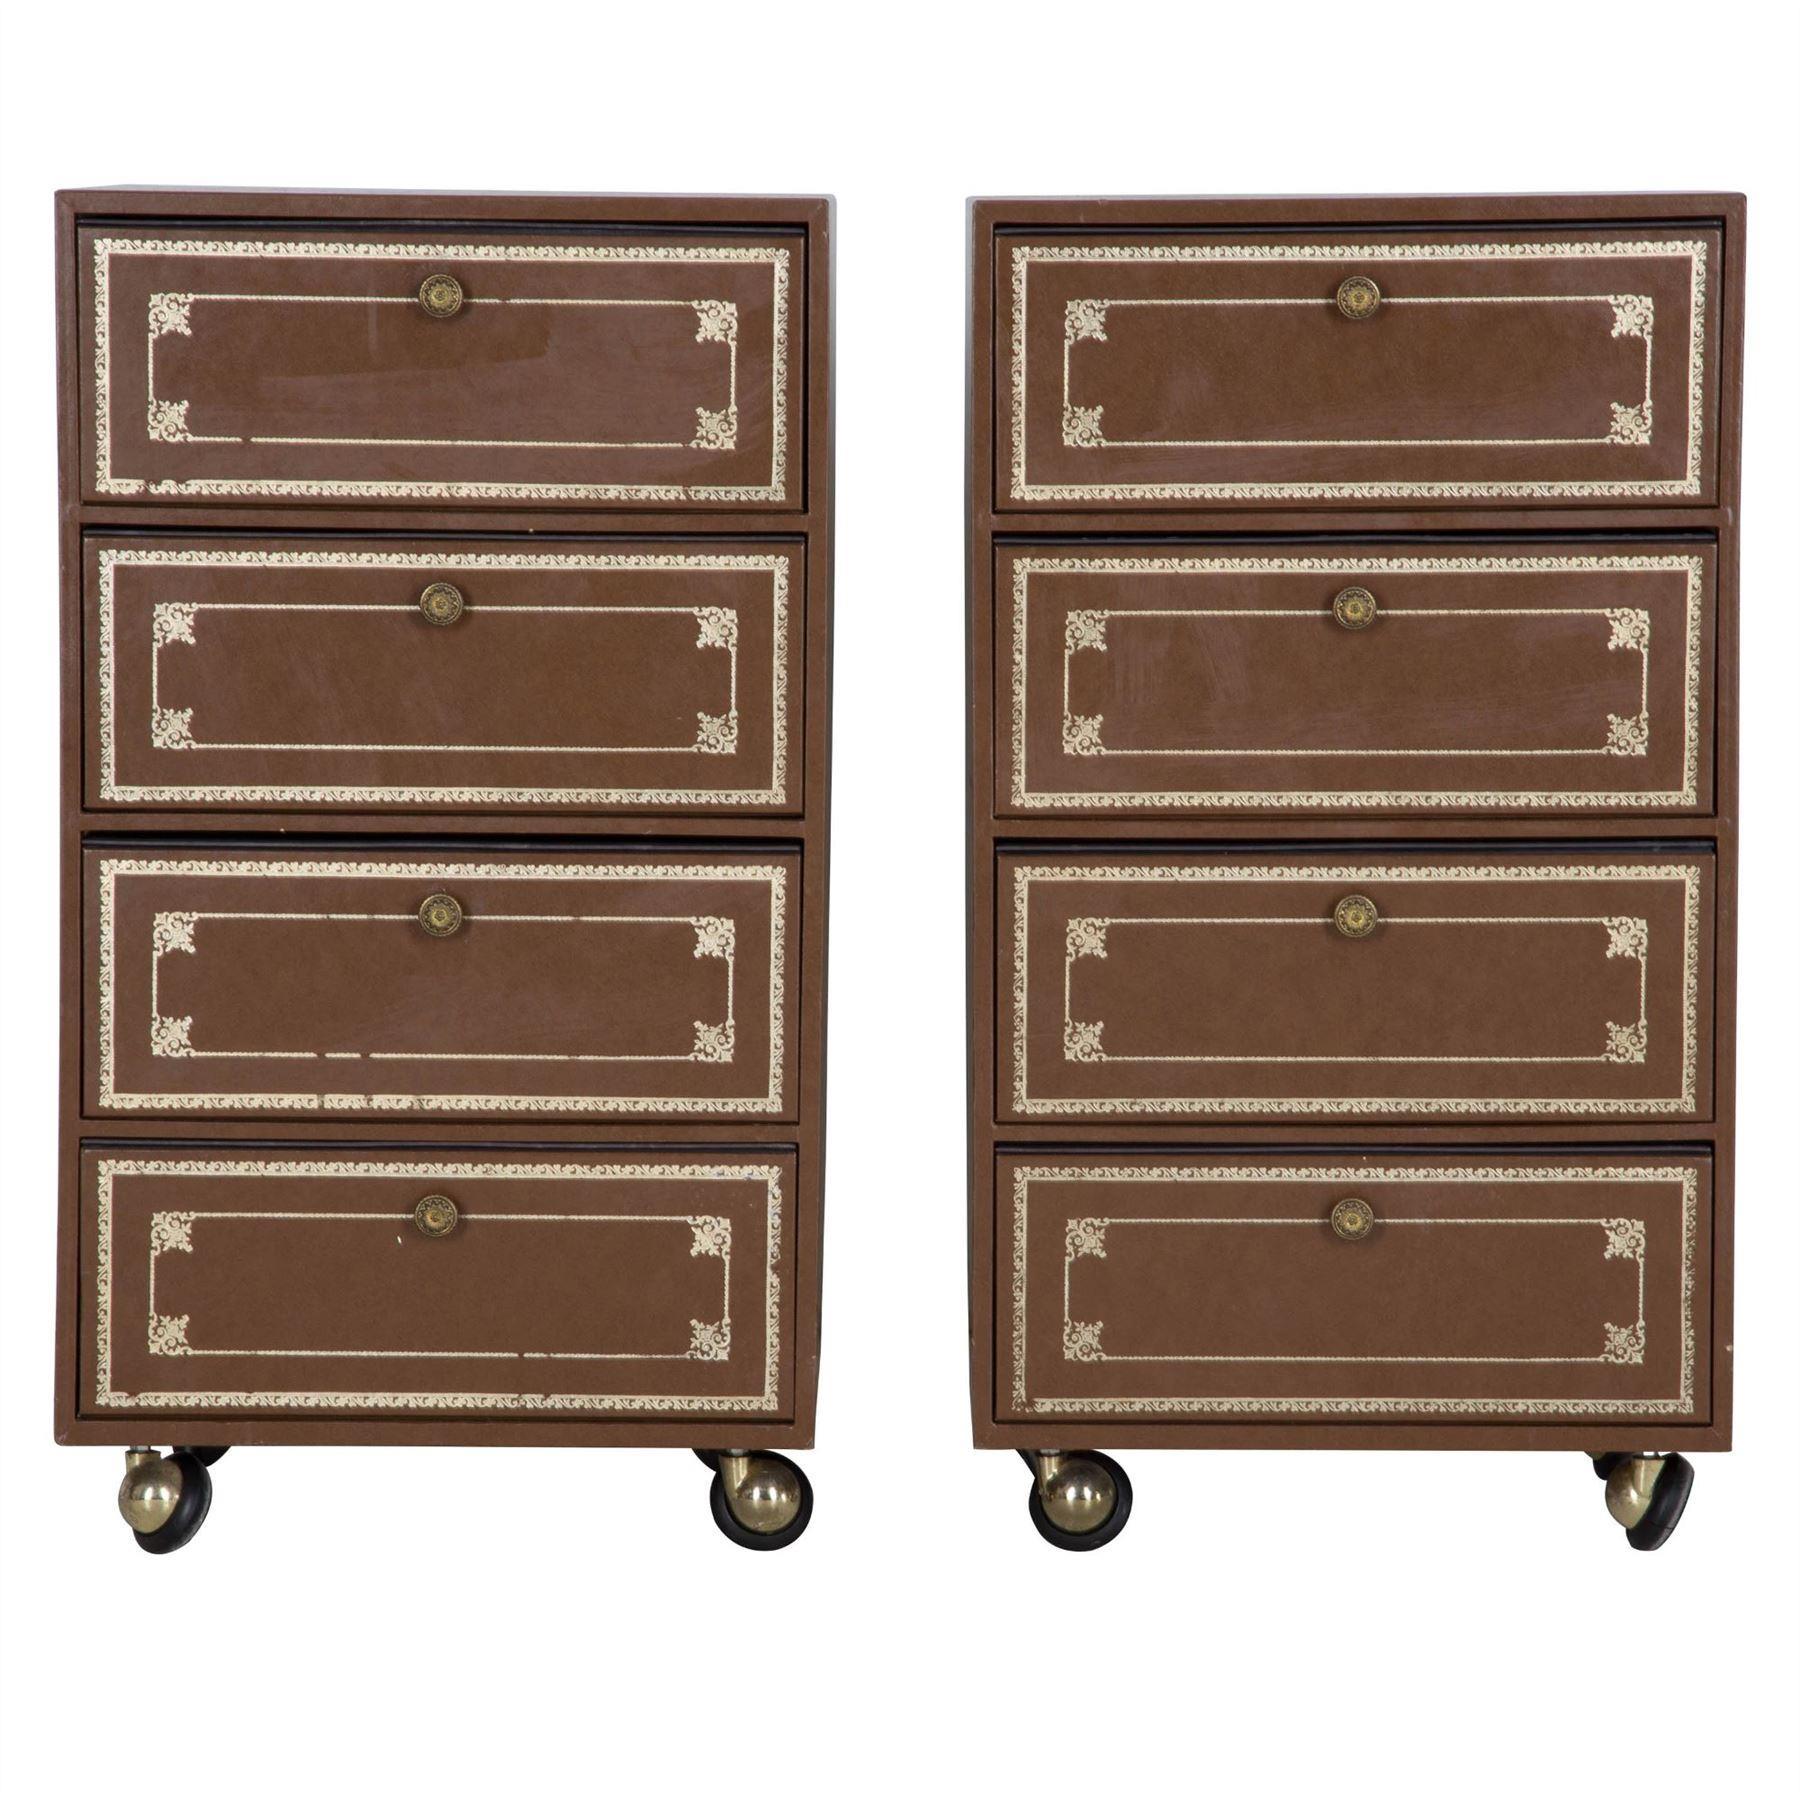 Pair of 1960s French leather and gilt tooled bedside drawers.